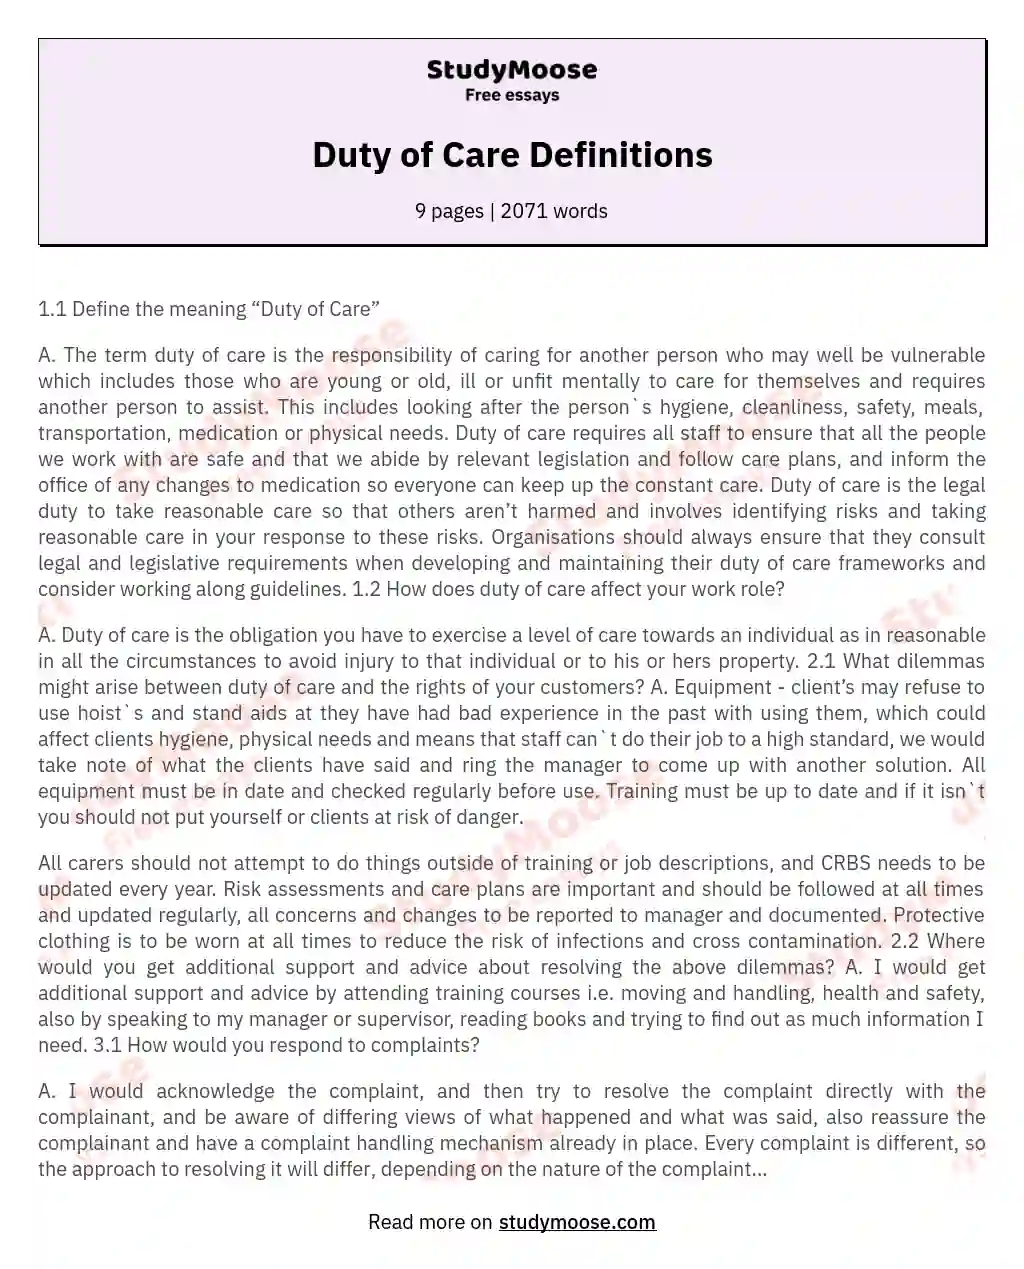 Duty of Care Definitions essay